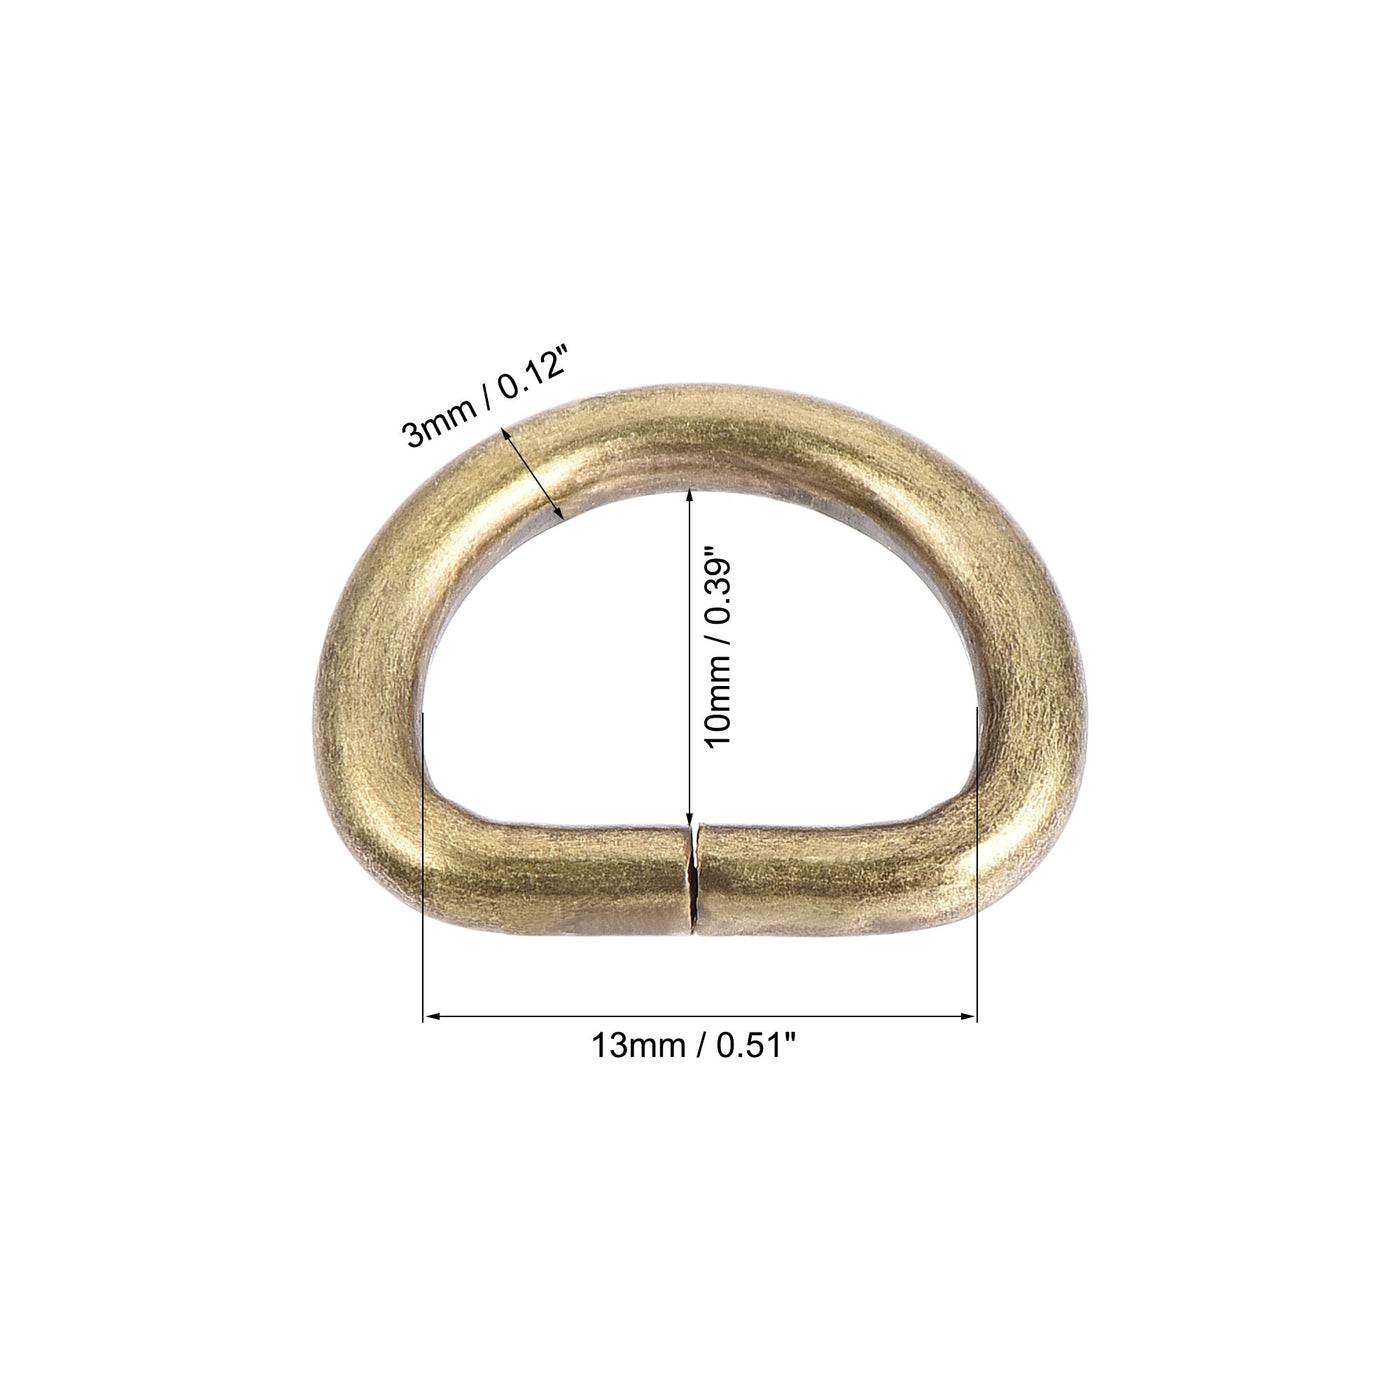 uxcell Uxcell Metal D Ring 0.51"(13mm) D-Rings Buckle for Hardware Bags Belts Craft DIY Accessories Bronze Tone 50pcs